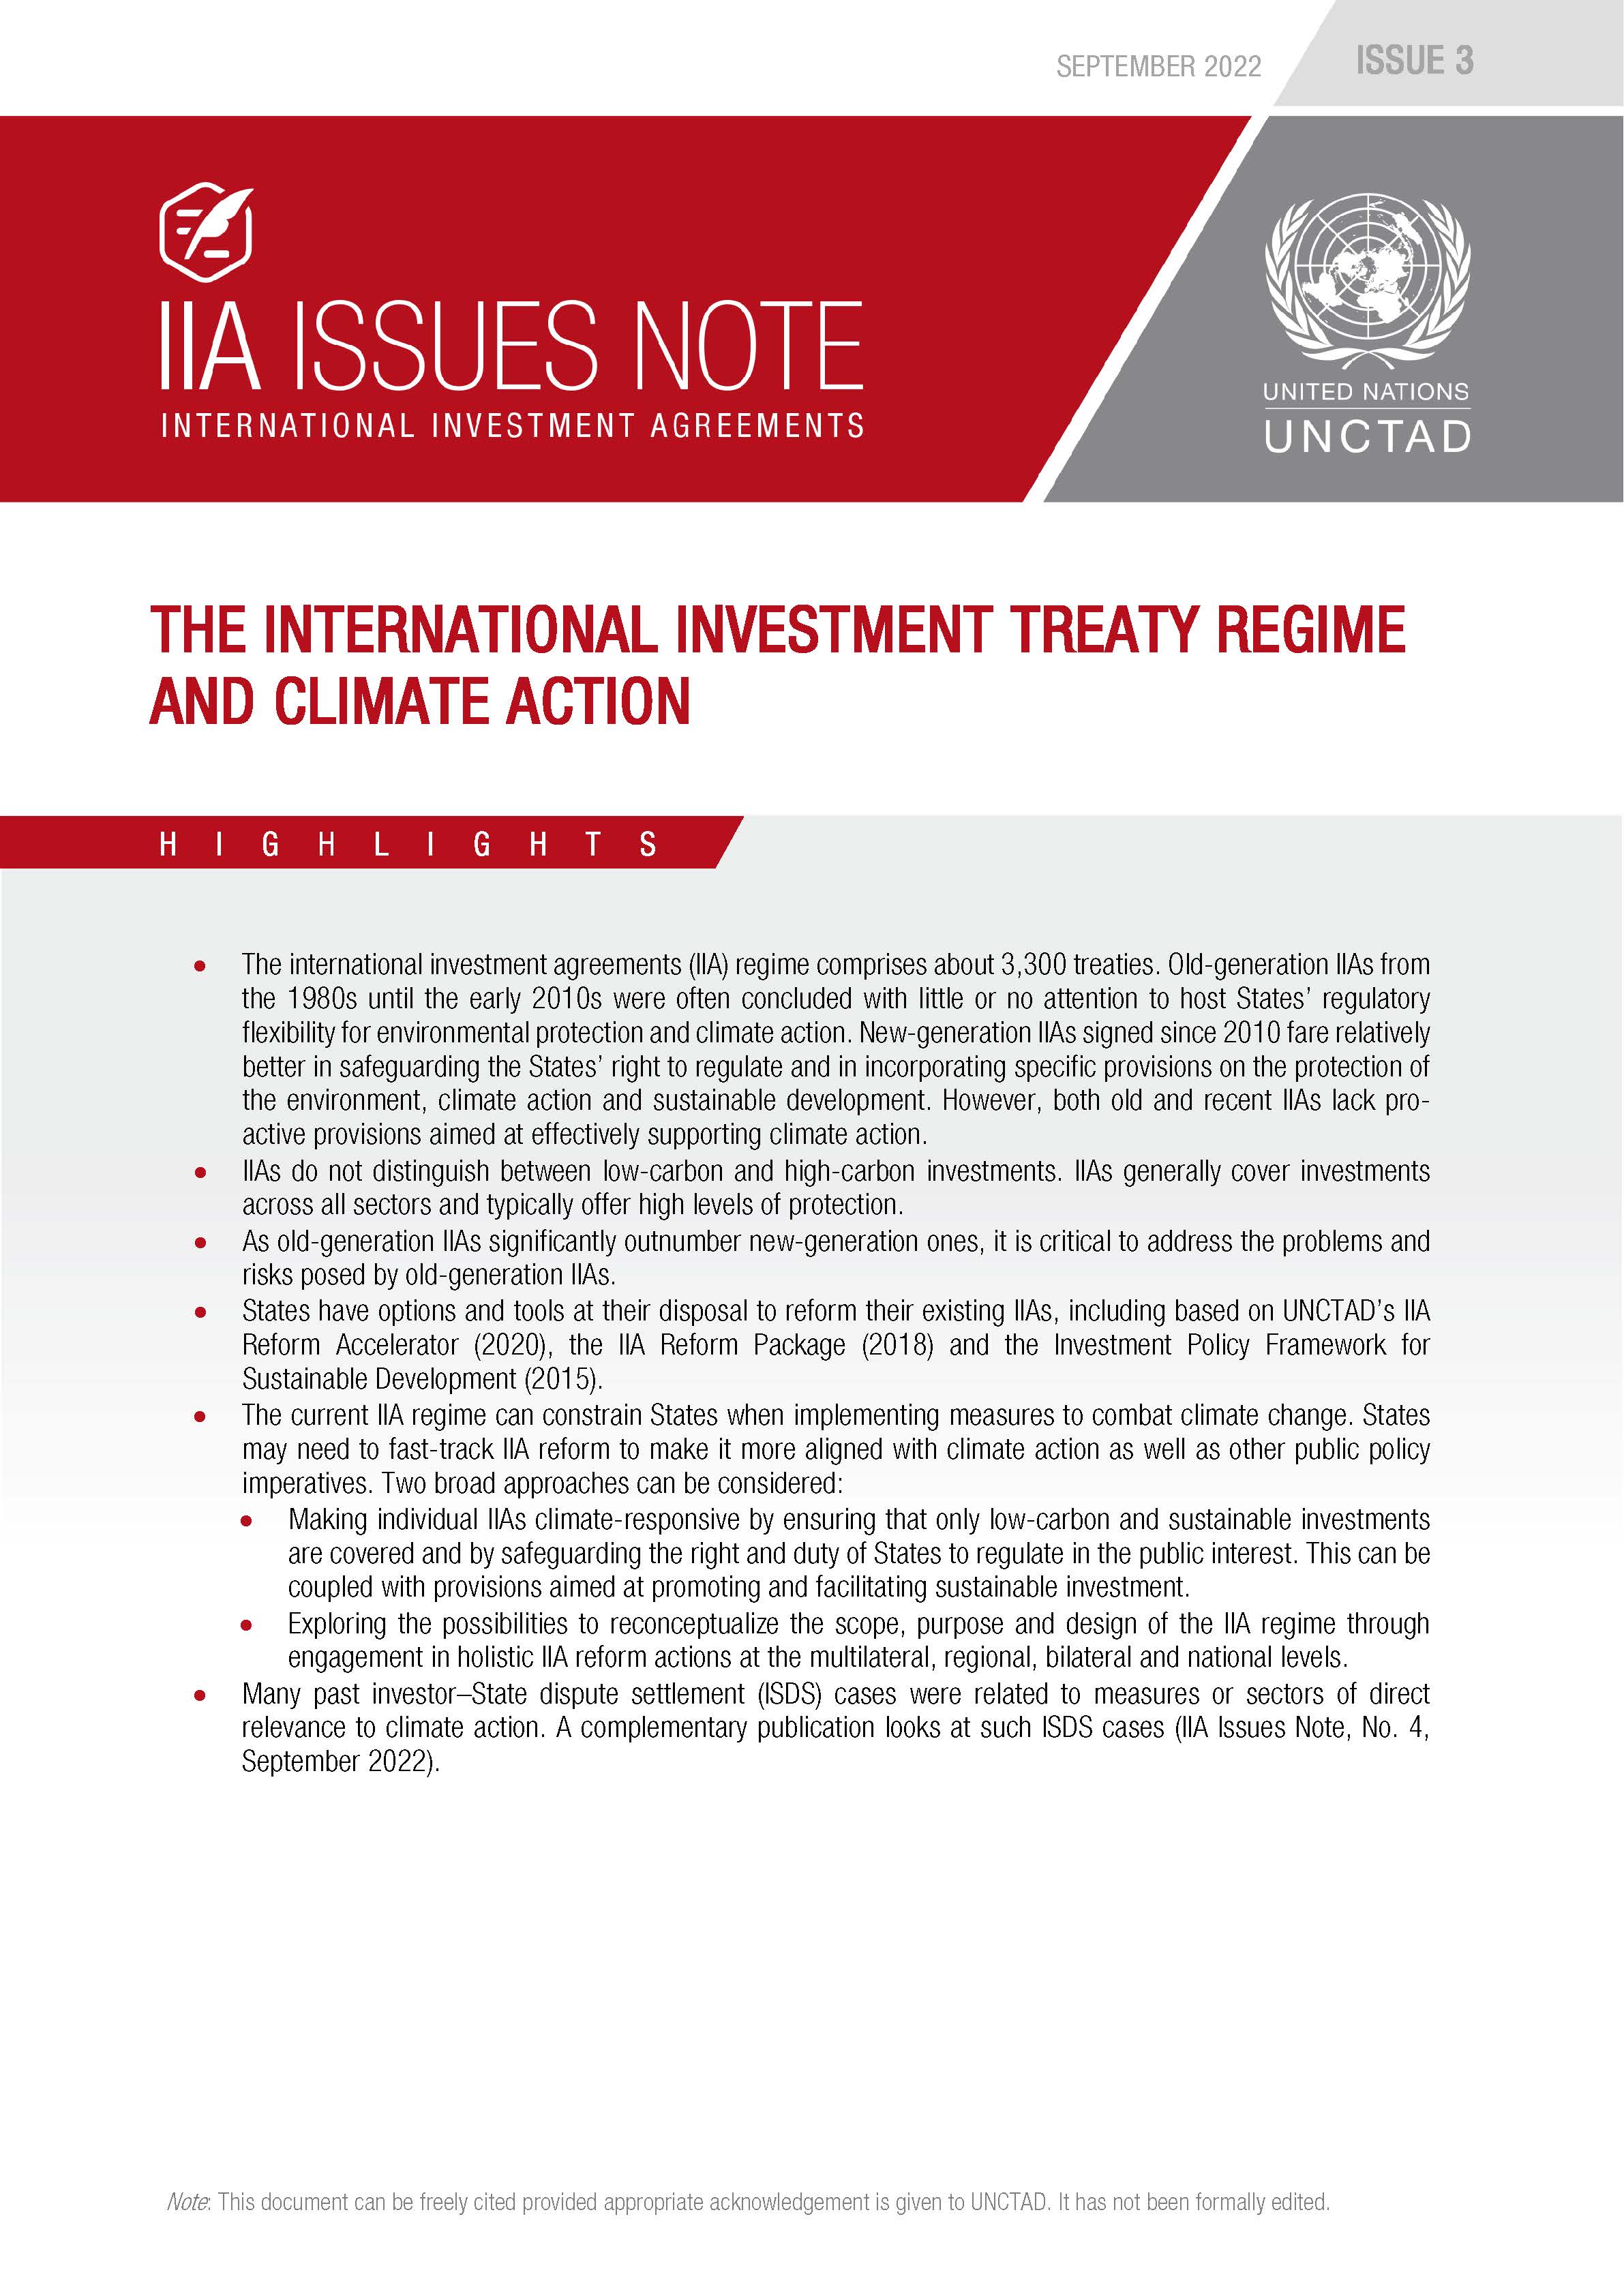 The International Investment Treaty Regime and Climate Action